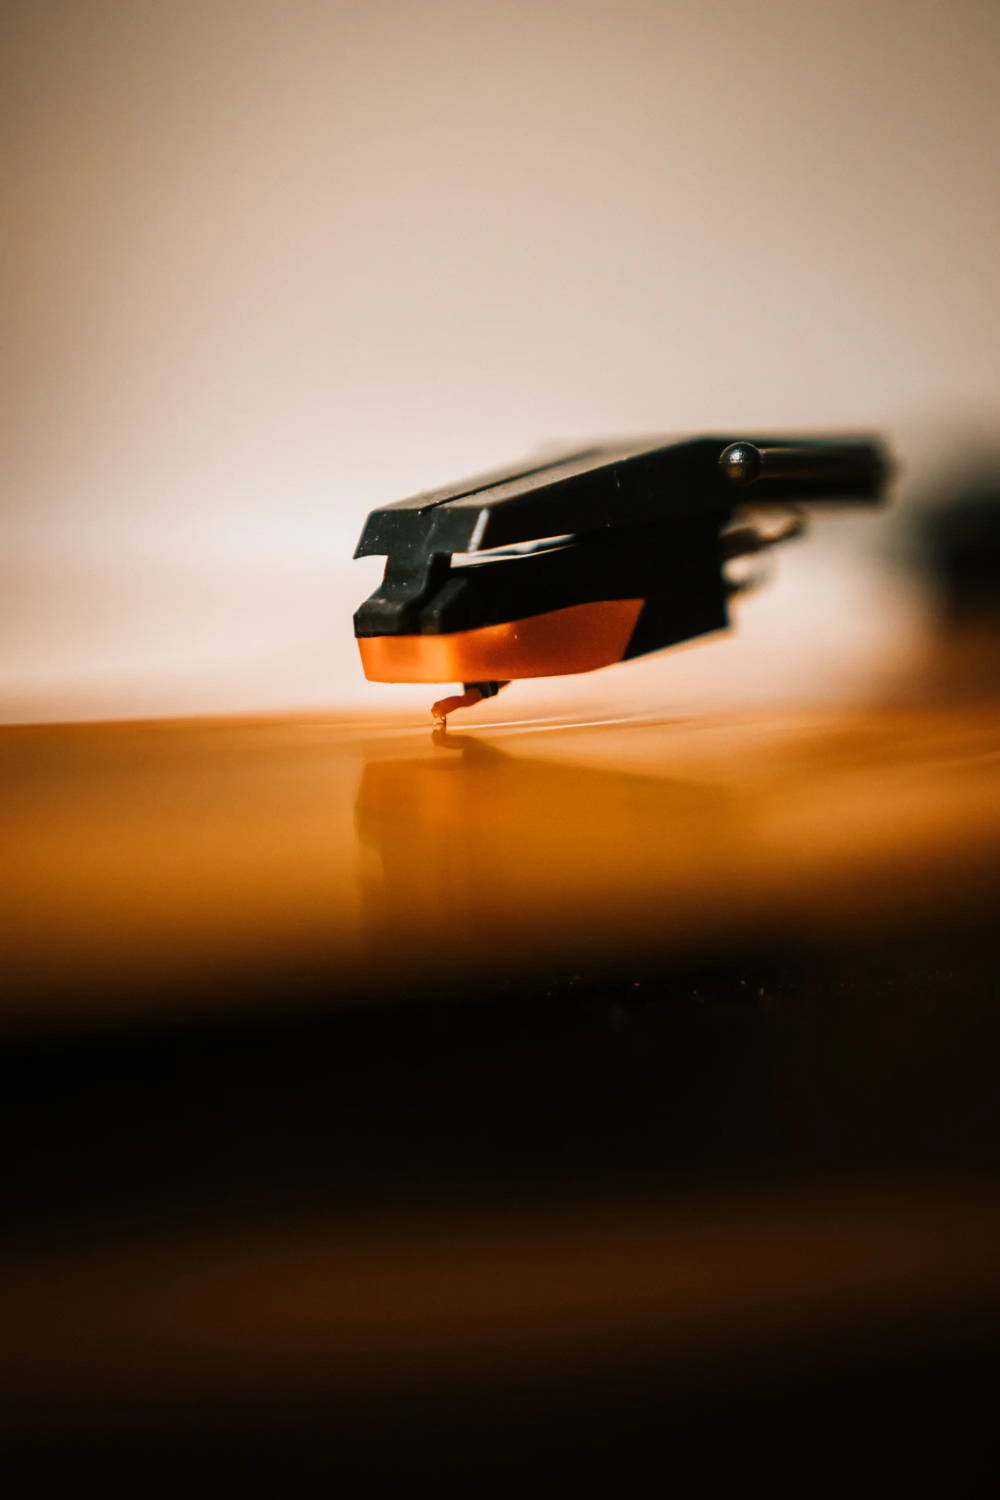 Needle on a record player on a spinning record